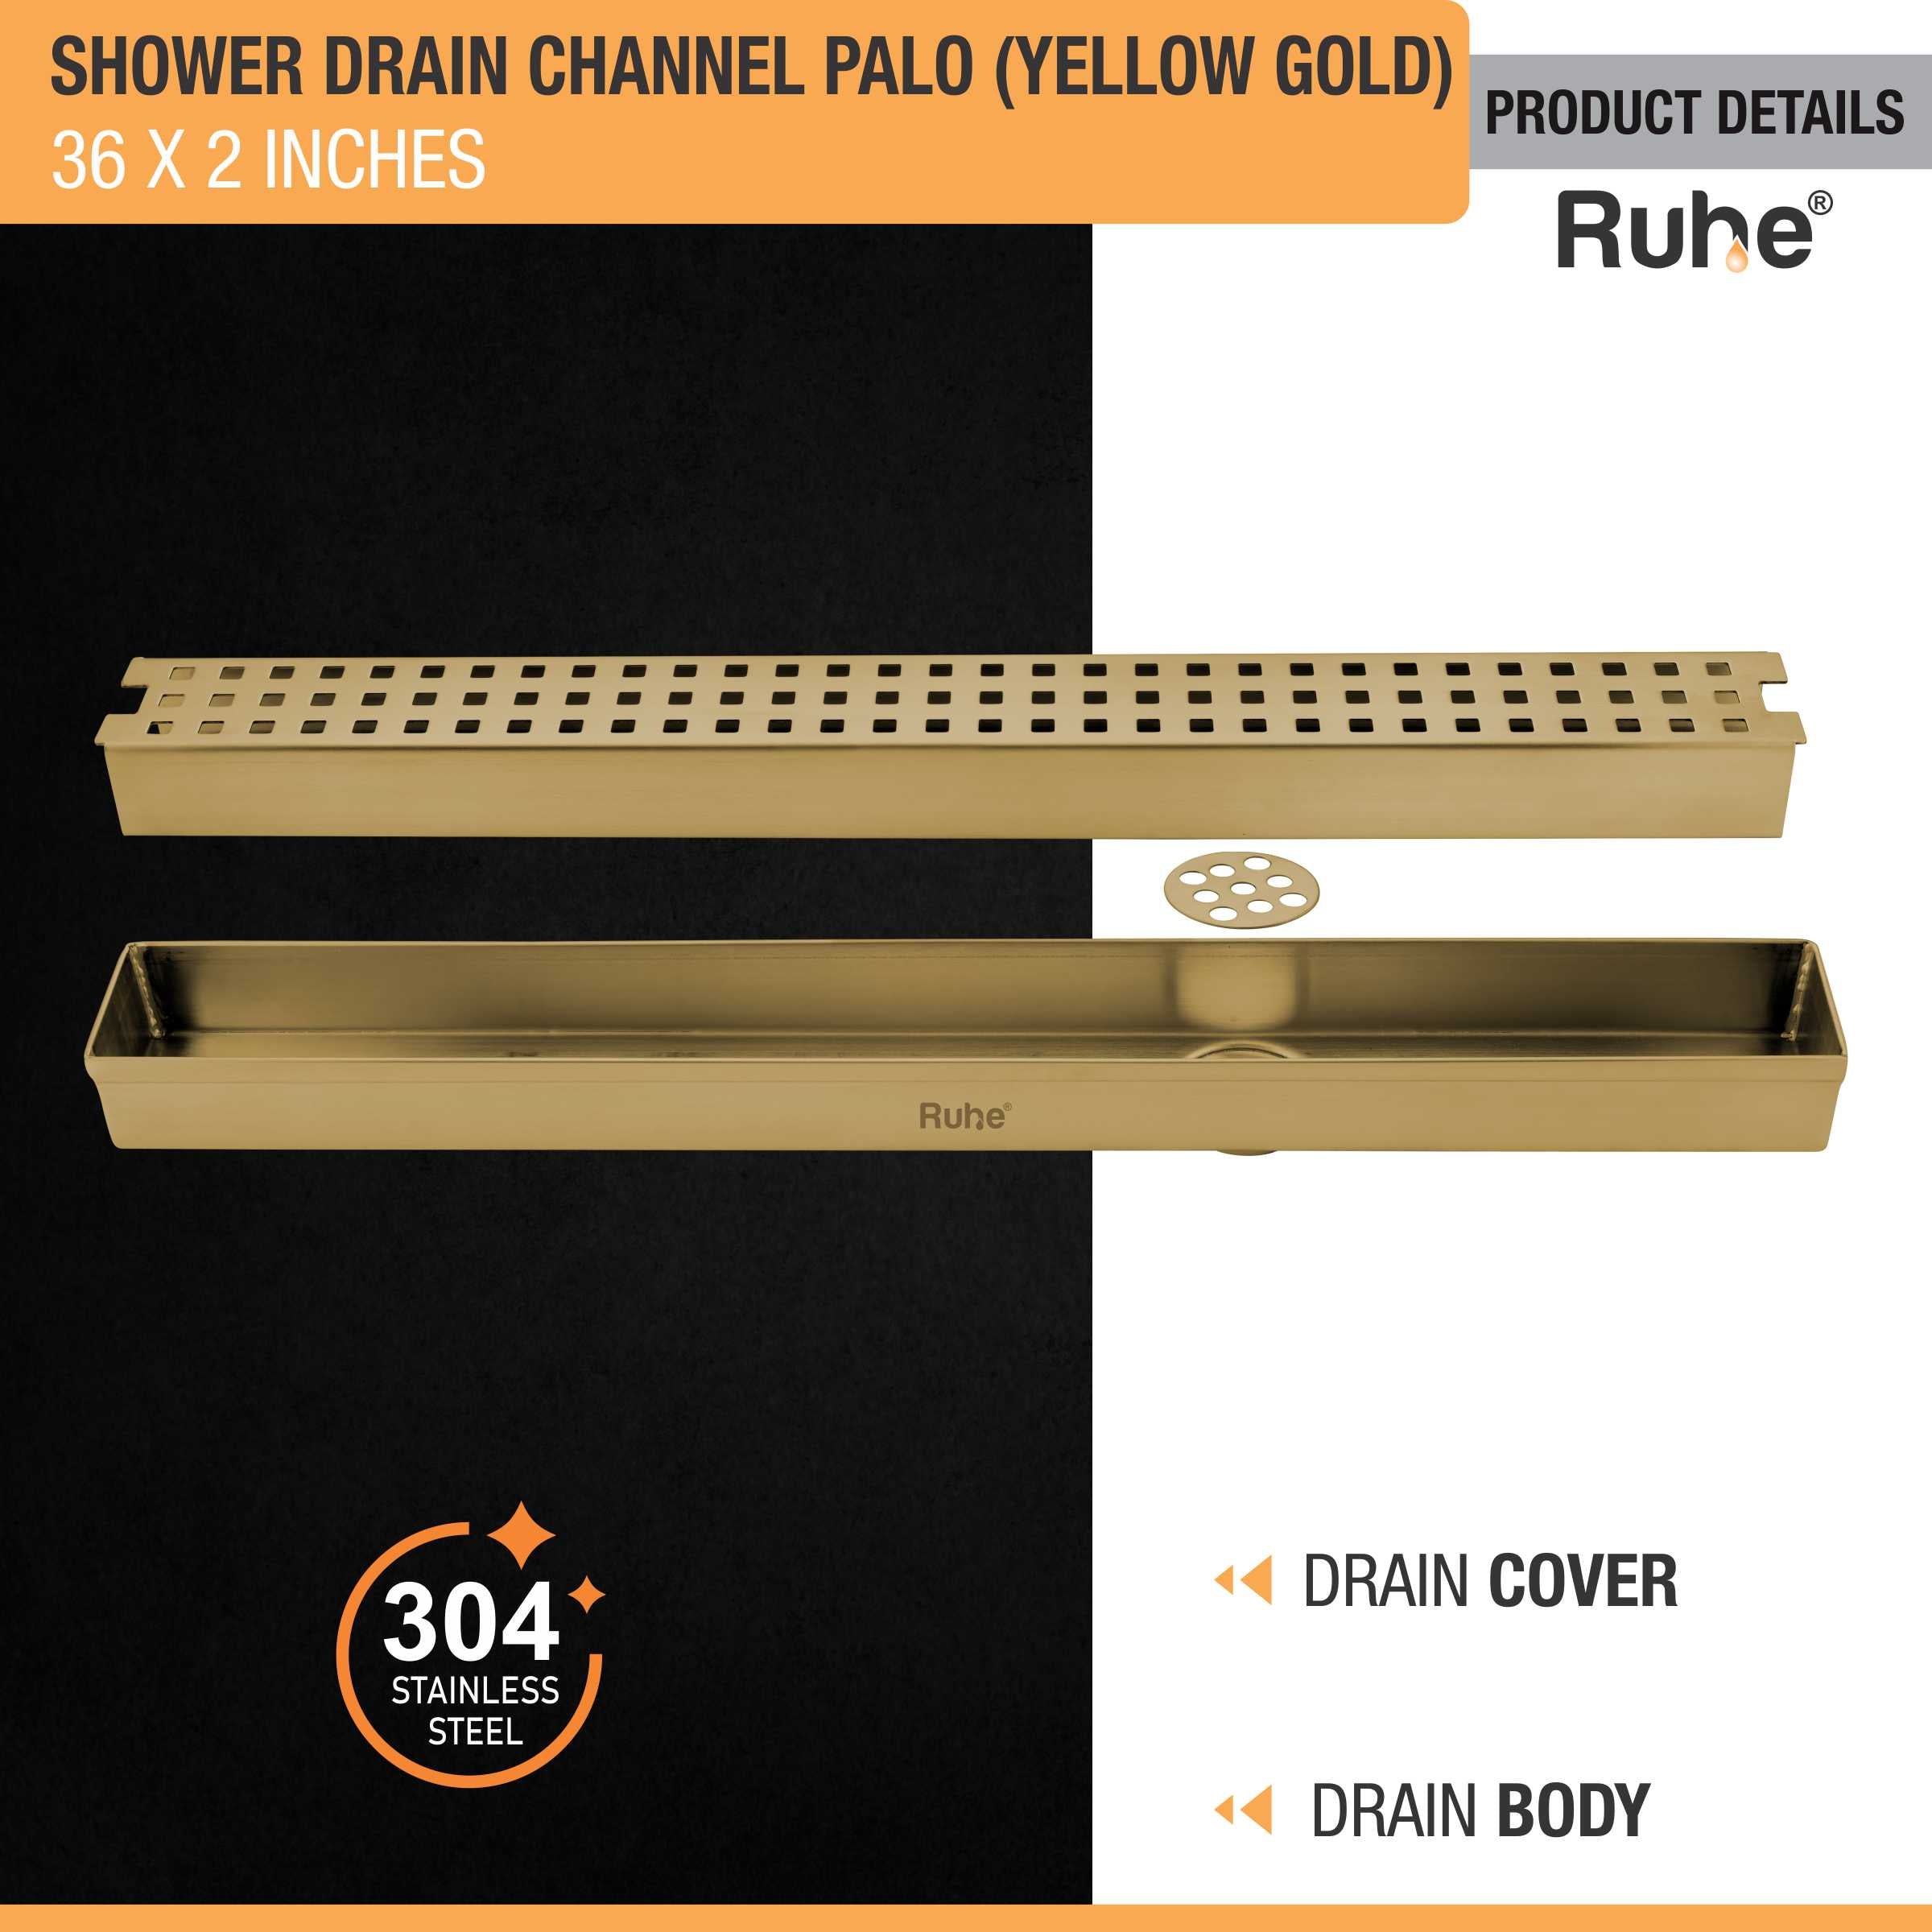 Palo Shower Drain Channel (36 x 2 Inches) YELLOW GOLD product details